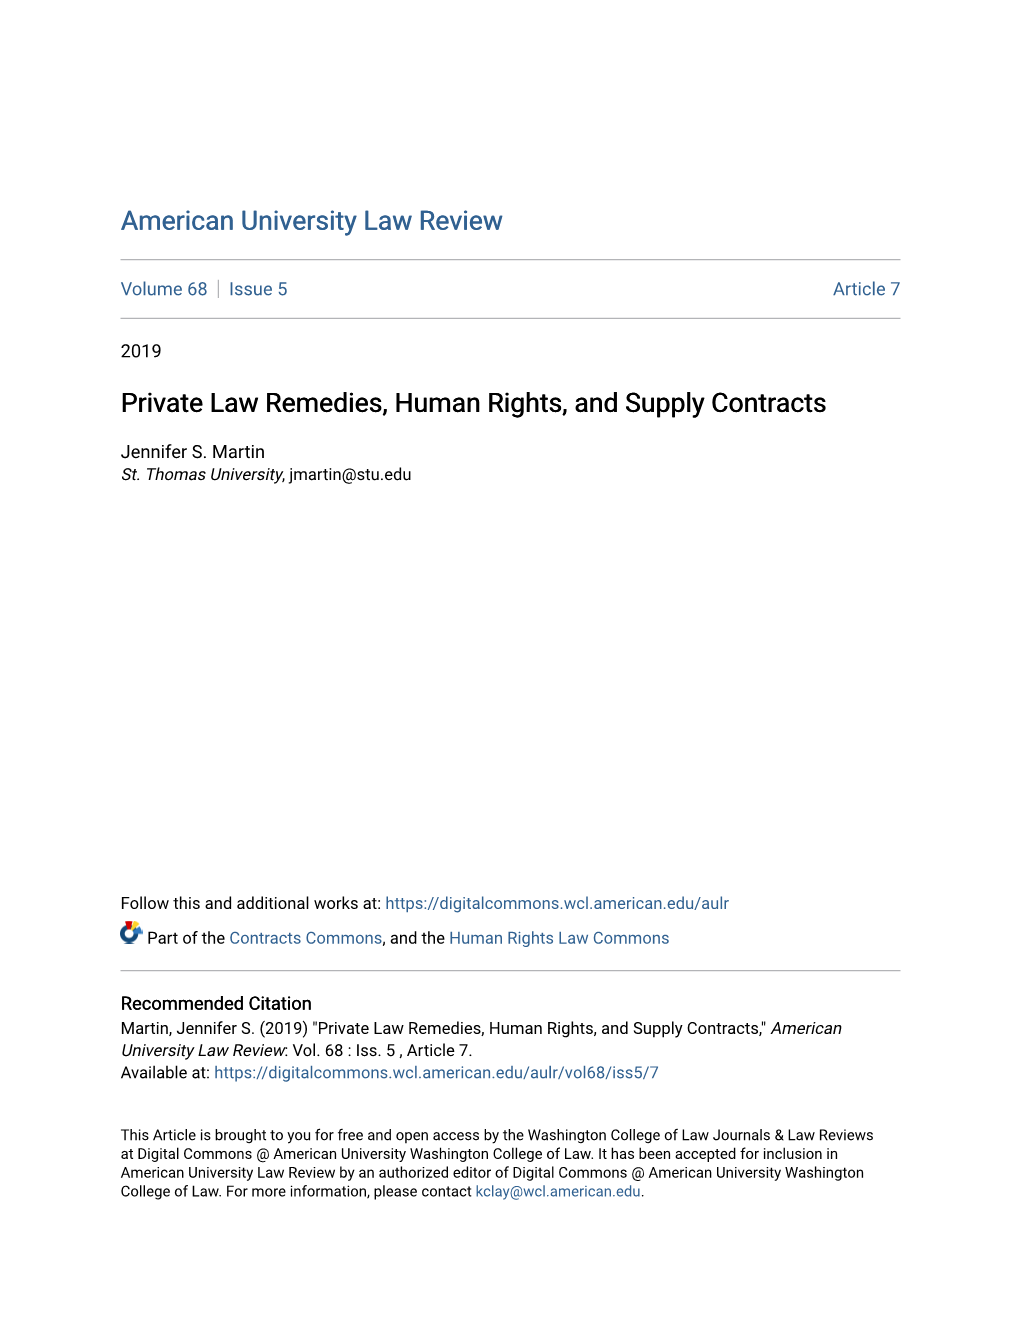 Private Law Remedies, Human Rights, and Supply Contracts